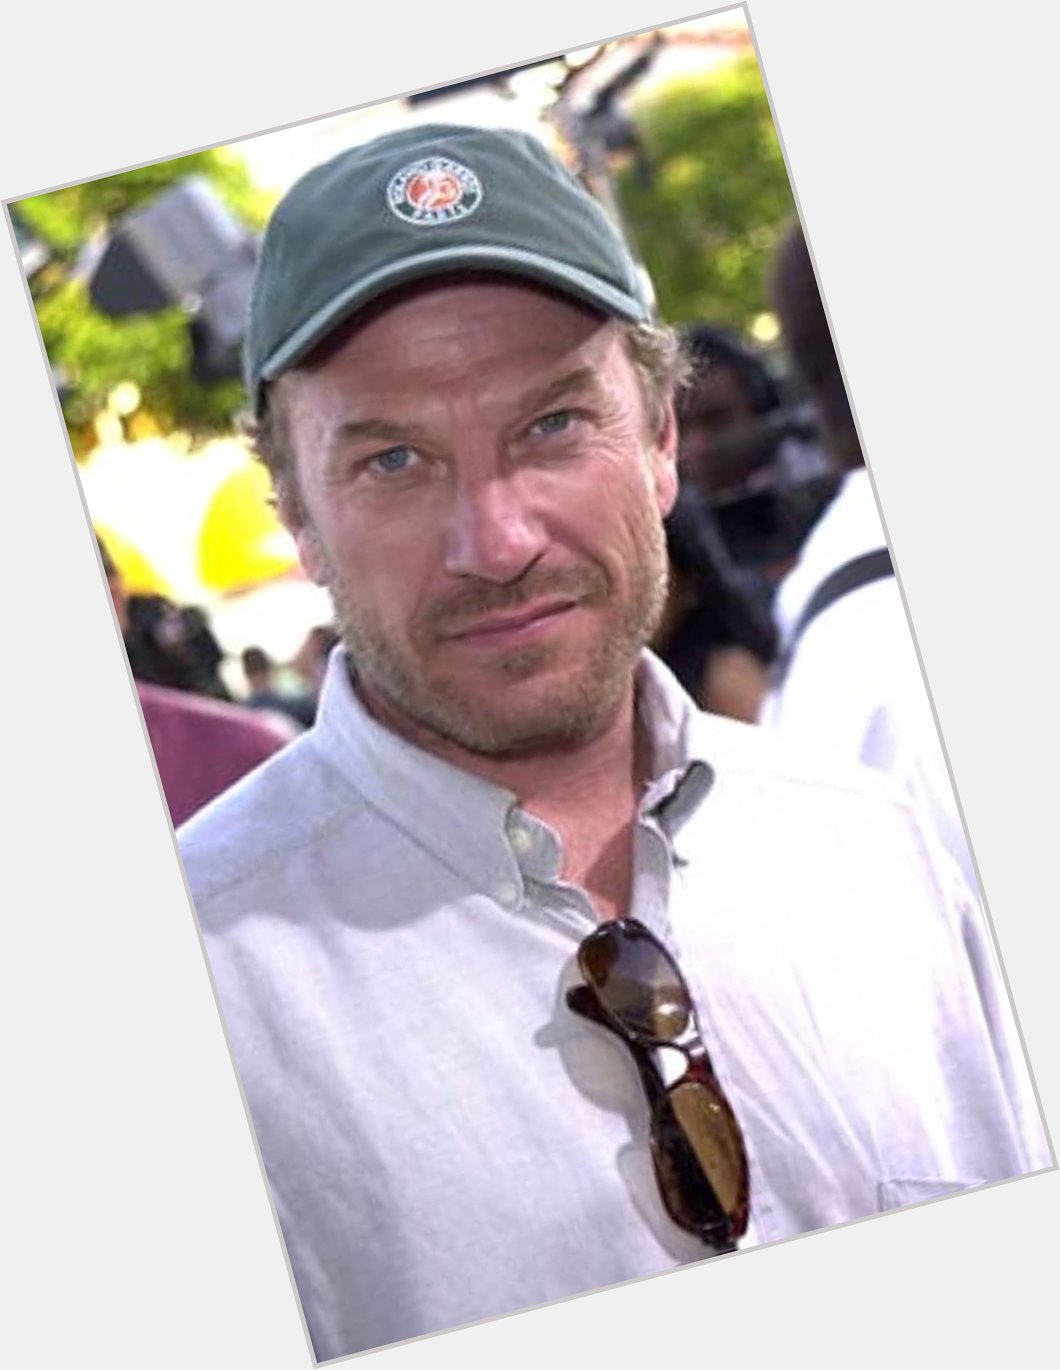 Speaking of that, Happy Birthday to Ted Levine!  